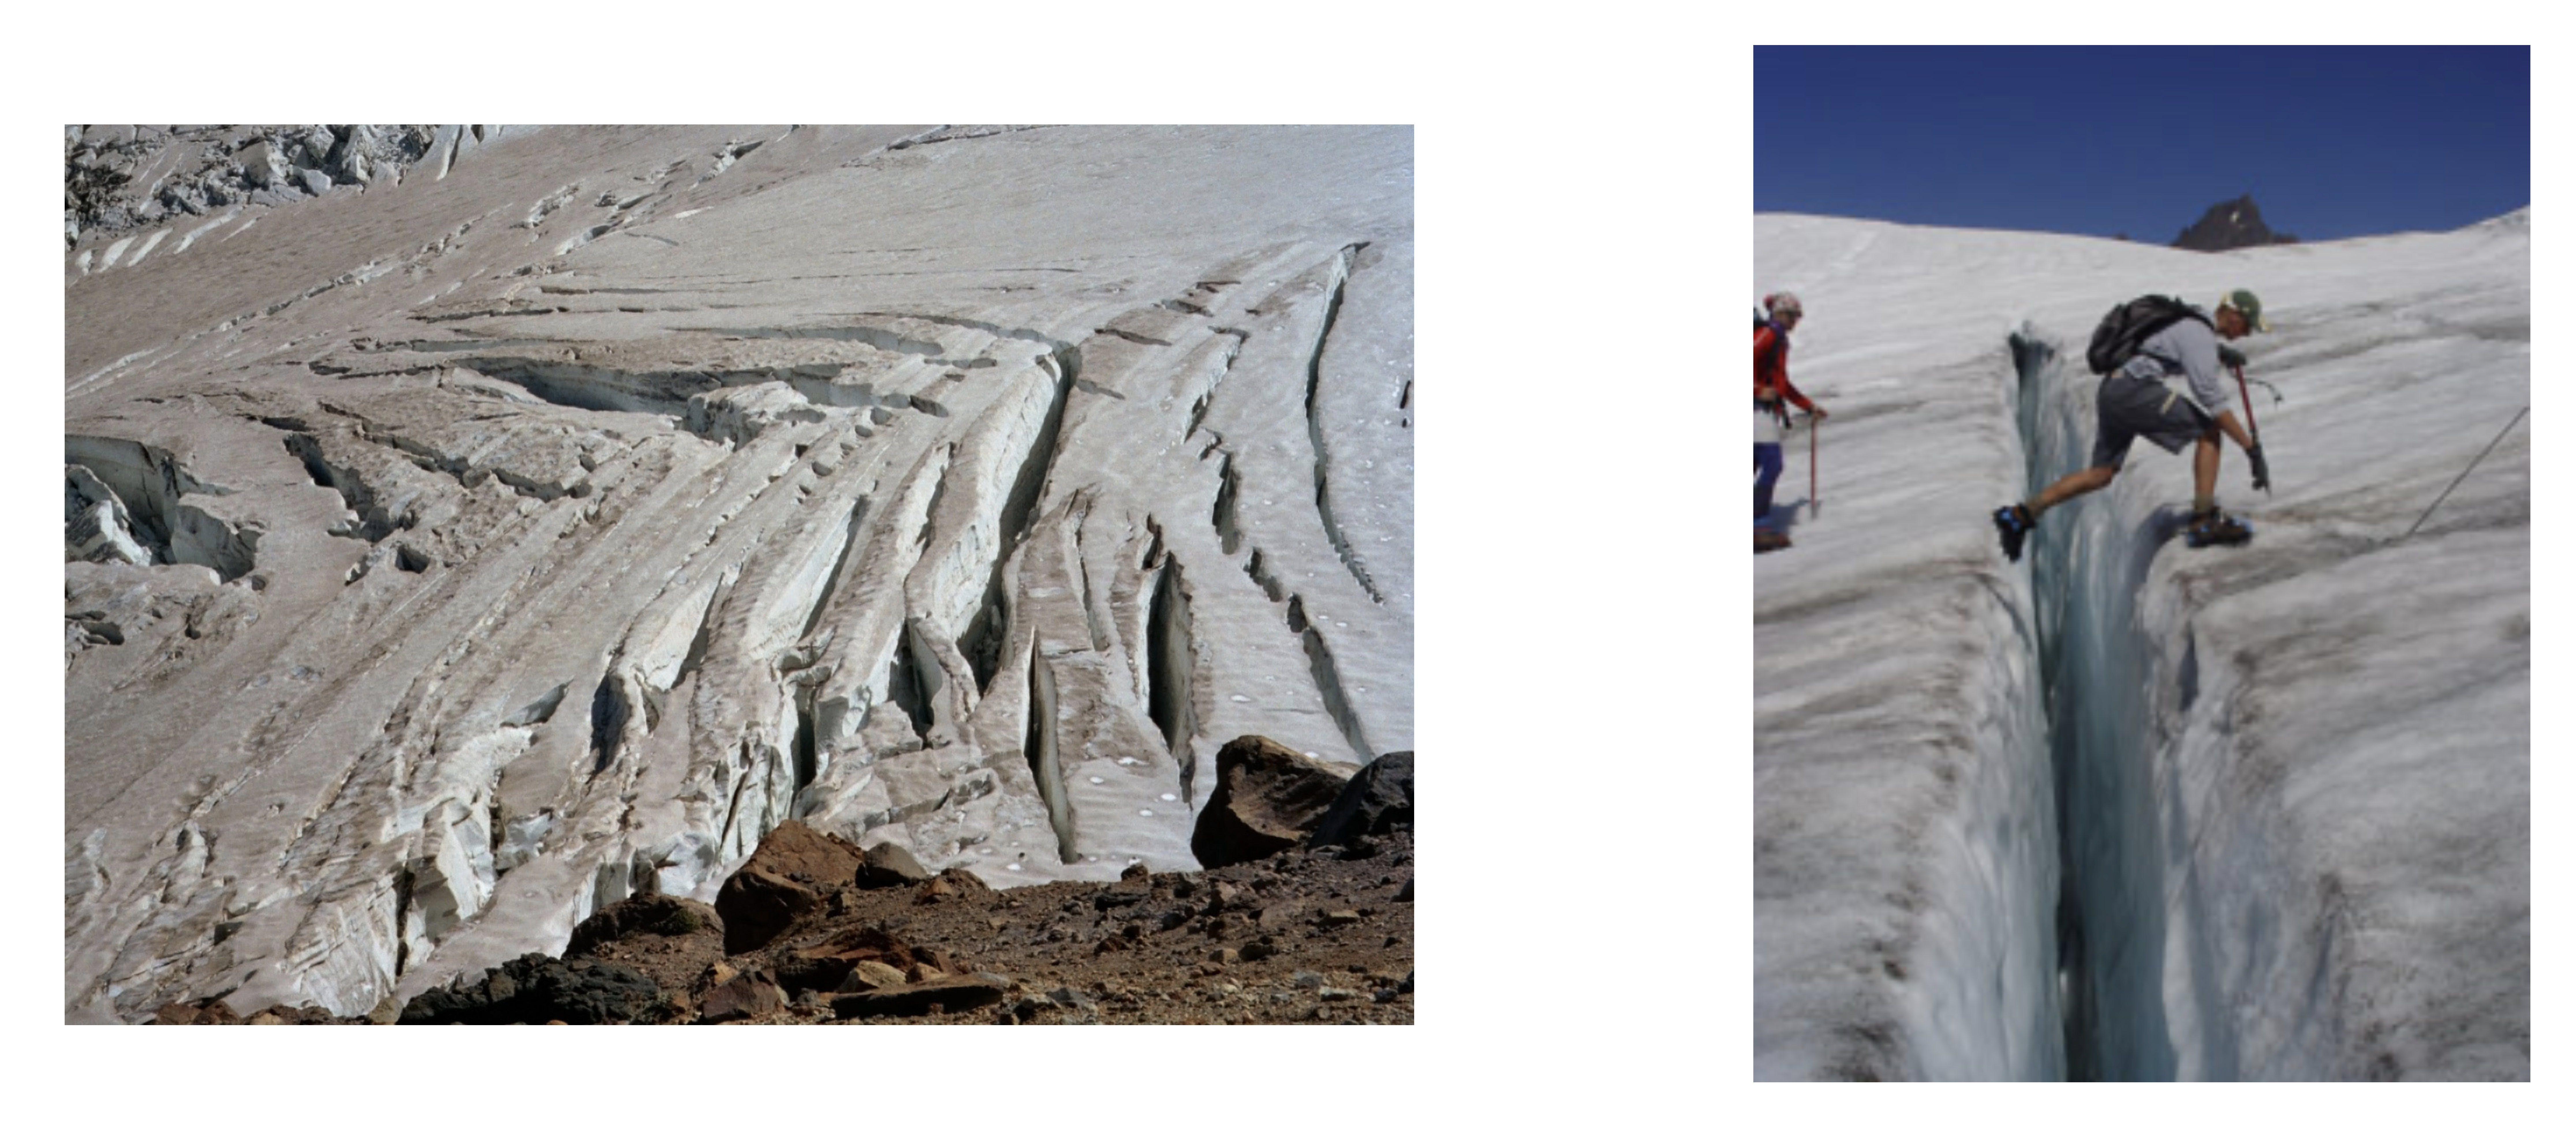 Two photos: the left photo shows deep cracks in a sheet of glacial ice and the right photo shows a person stepping over a deep crack in a sheet of glacial ice.